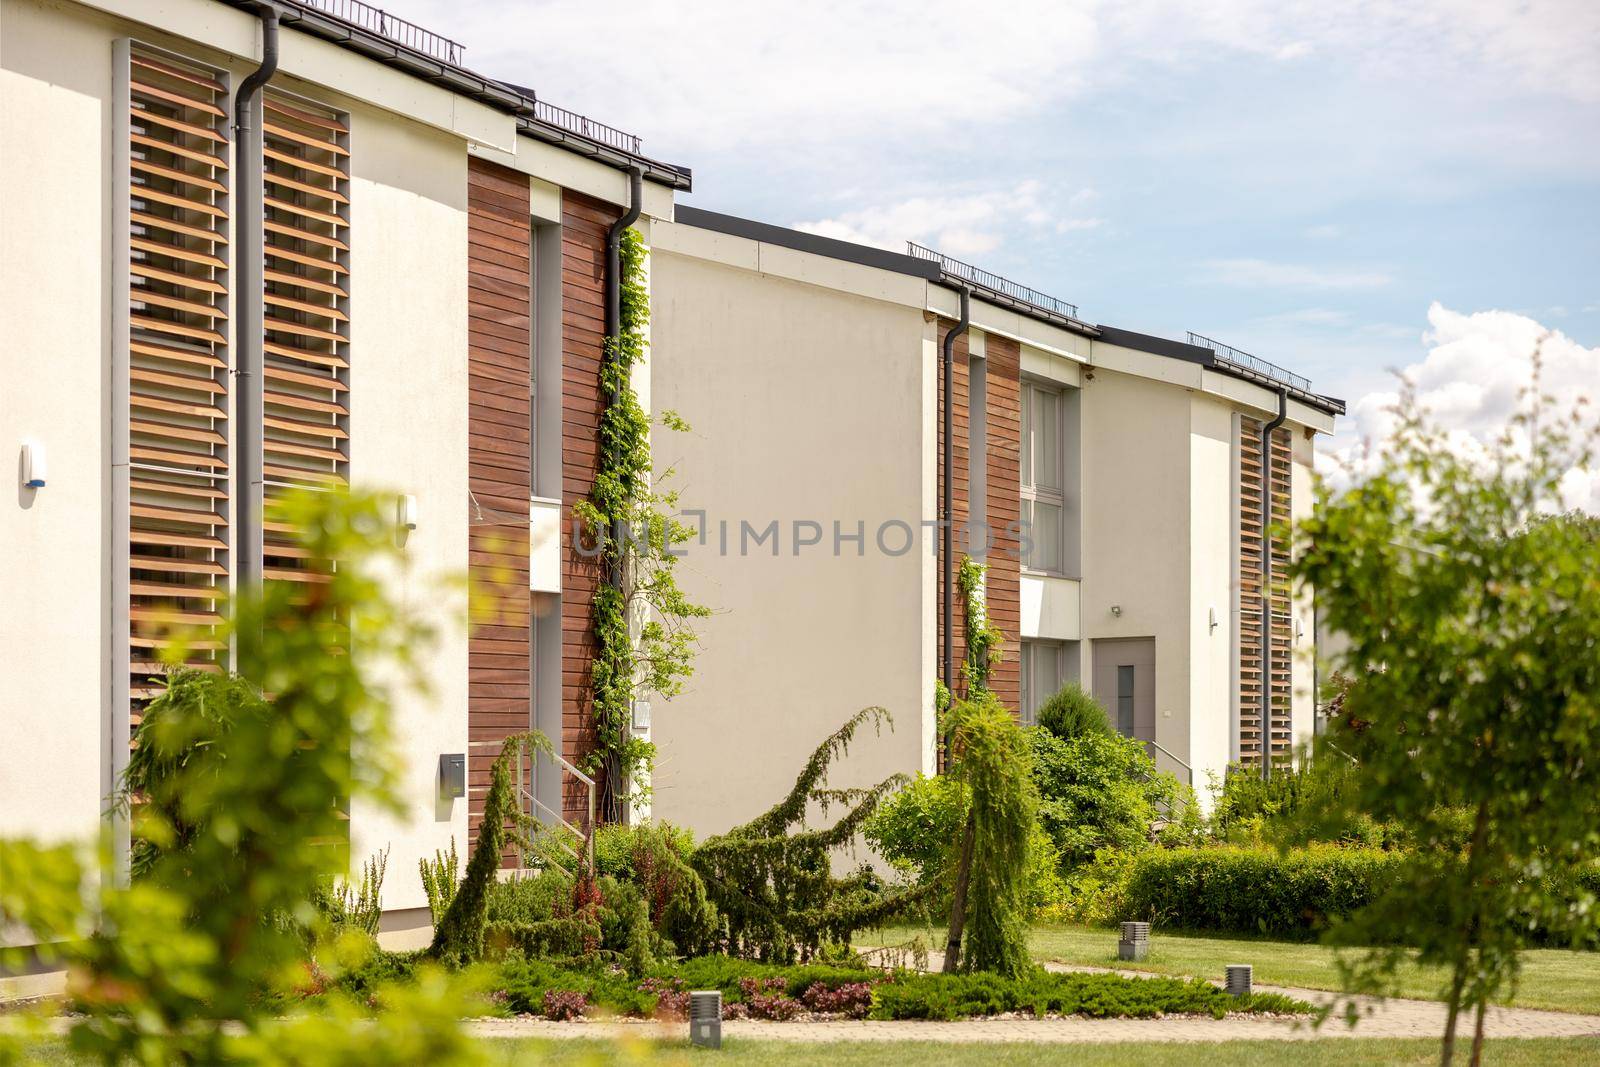 Row of modern cottages. Brand new row of single family houses. Modern design of urban living residences with private courtyards, sophisticated finishes. New development. Green outdoor facilities, lawn